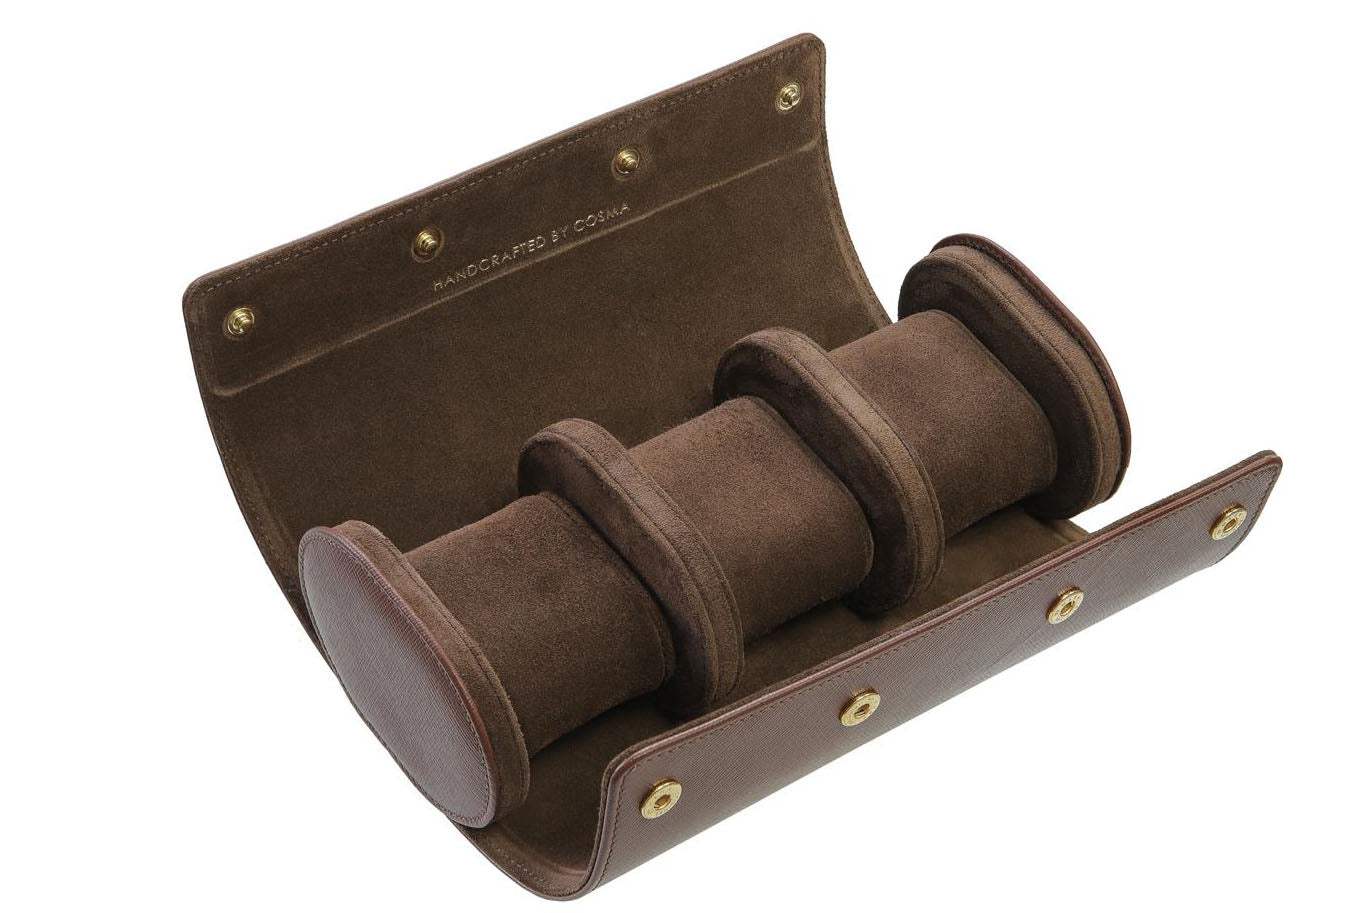 Leather Watch Roll for 3 watches - Saffiano Dark Brown / Chocolate